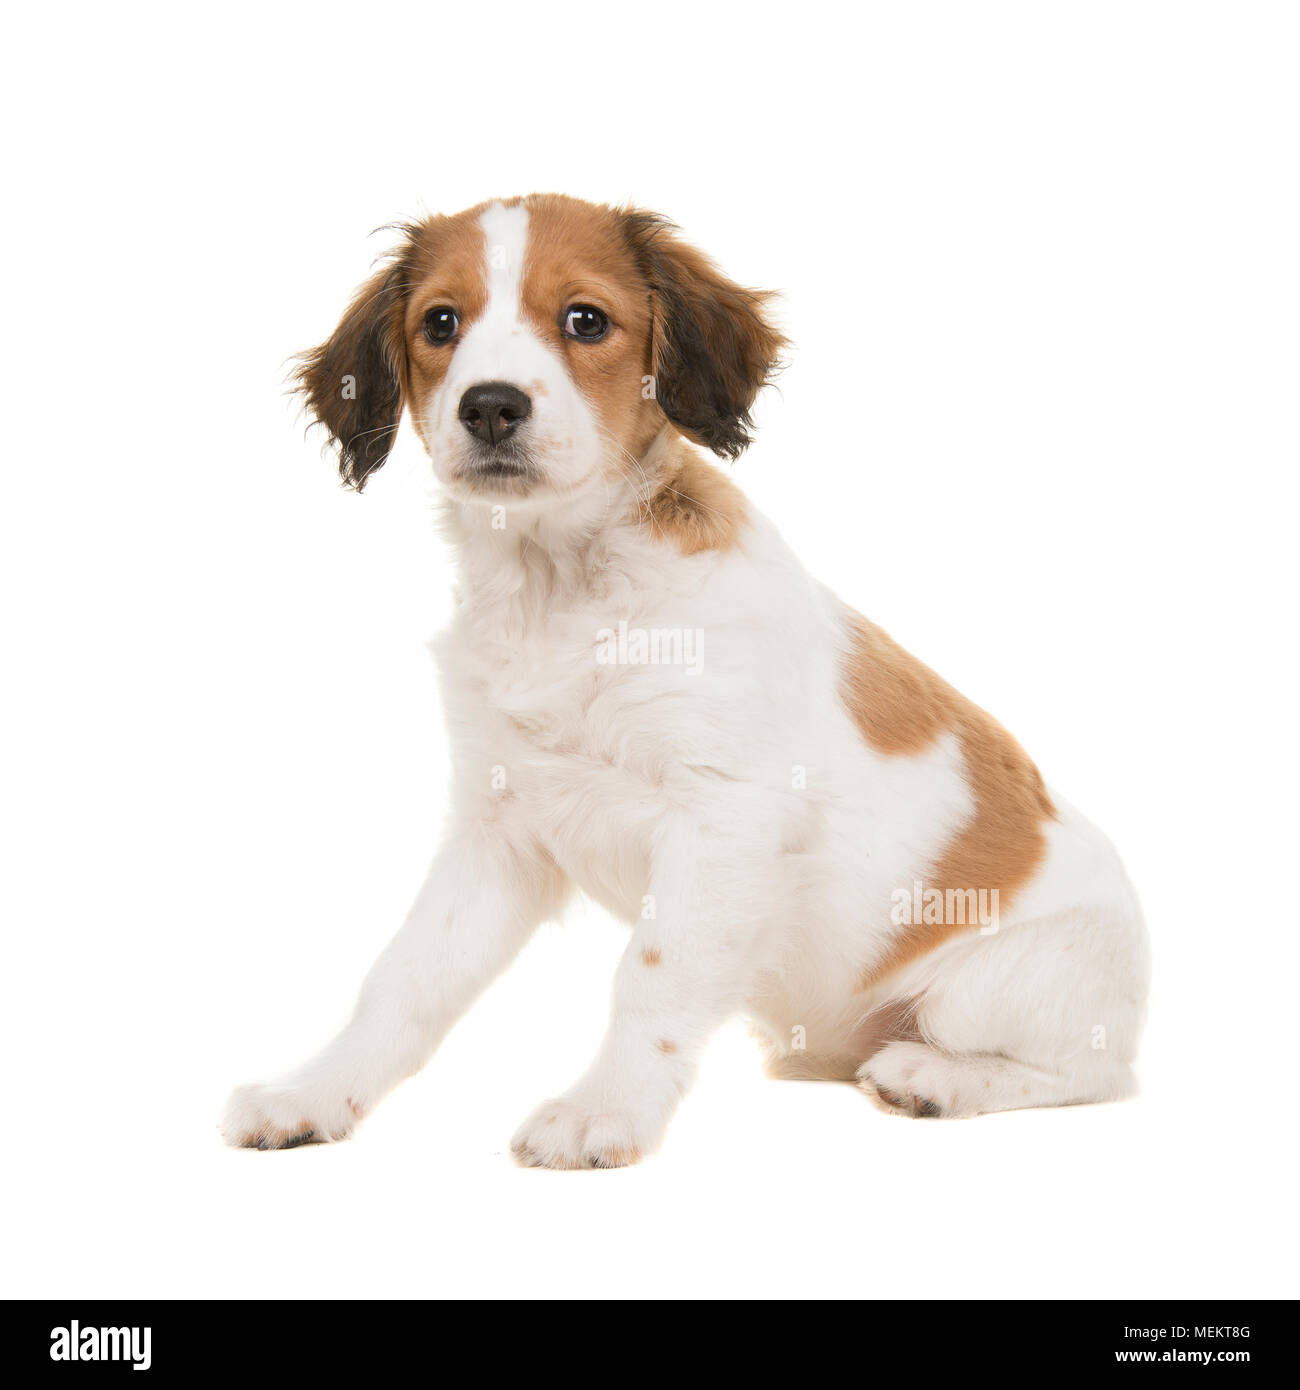 Adorable kooikerhondje puppy sitting seen from the side on a white background Stock Photo